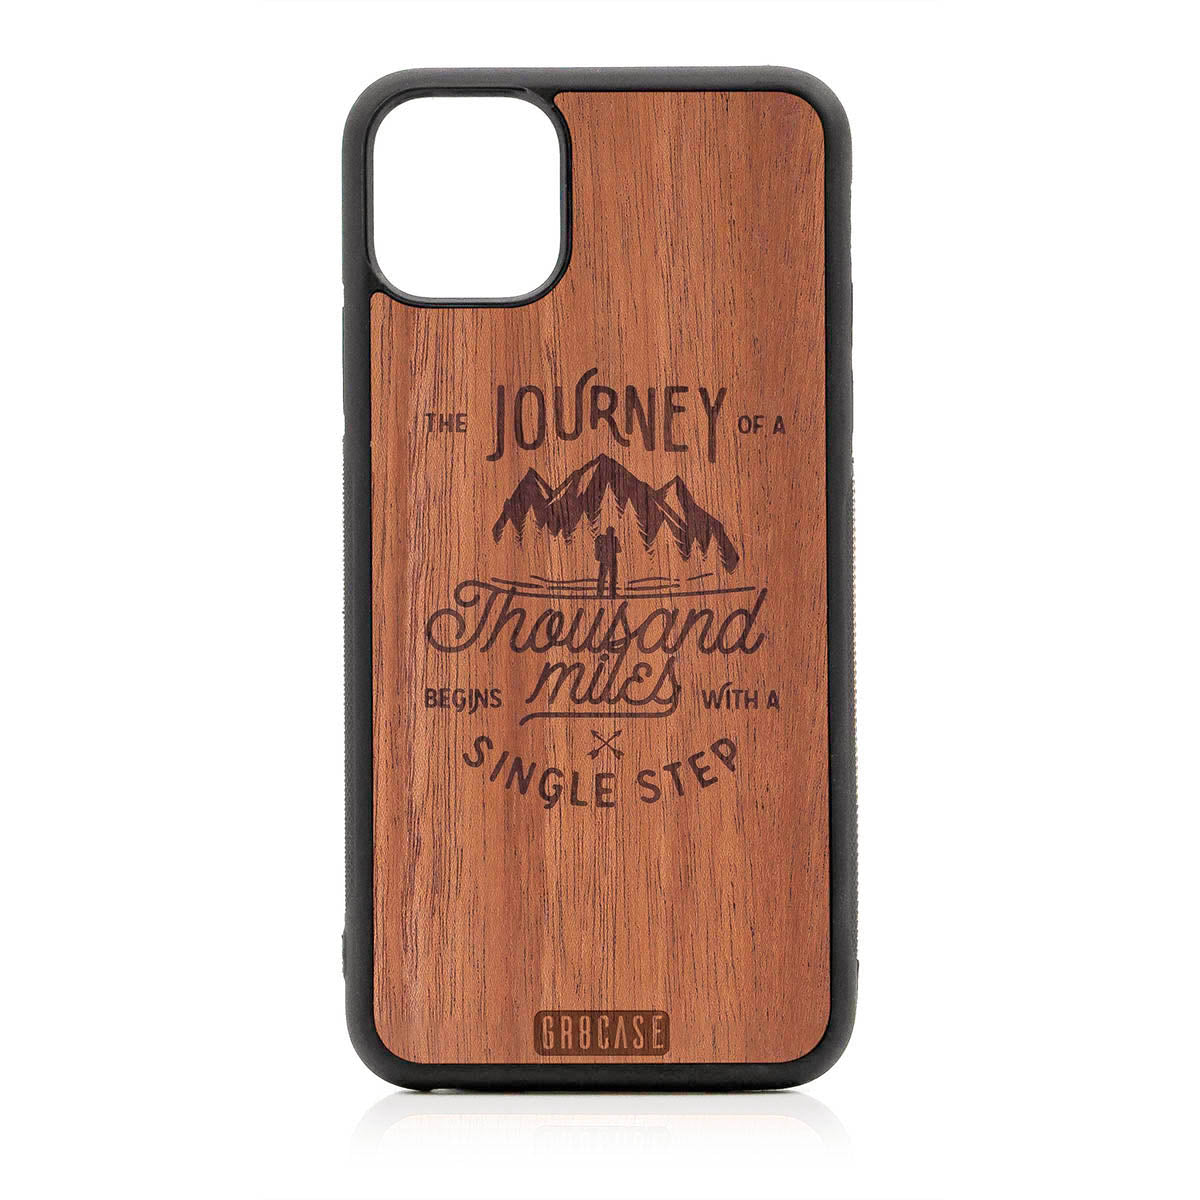 The Journey Of A Thousand Miles Begins With A Single Step Design Wood Case For iPhone 11 Pro Max